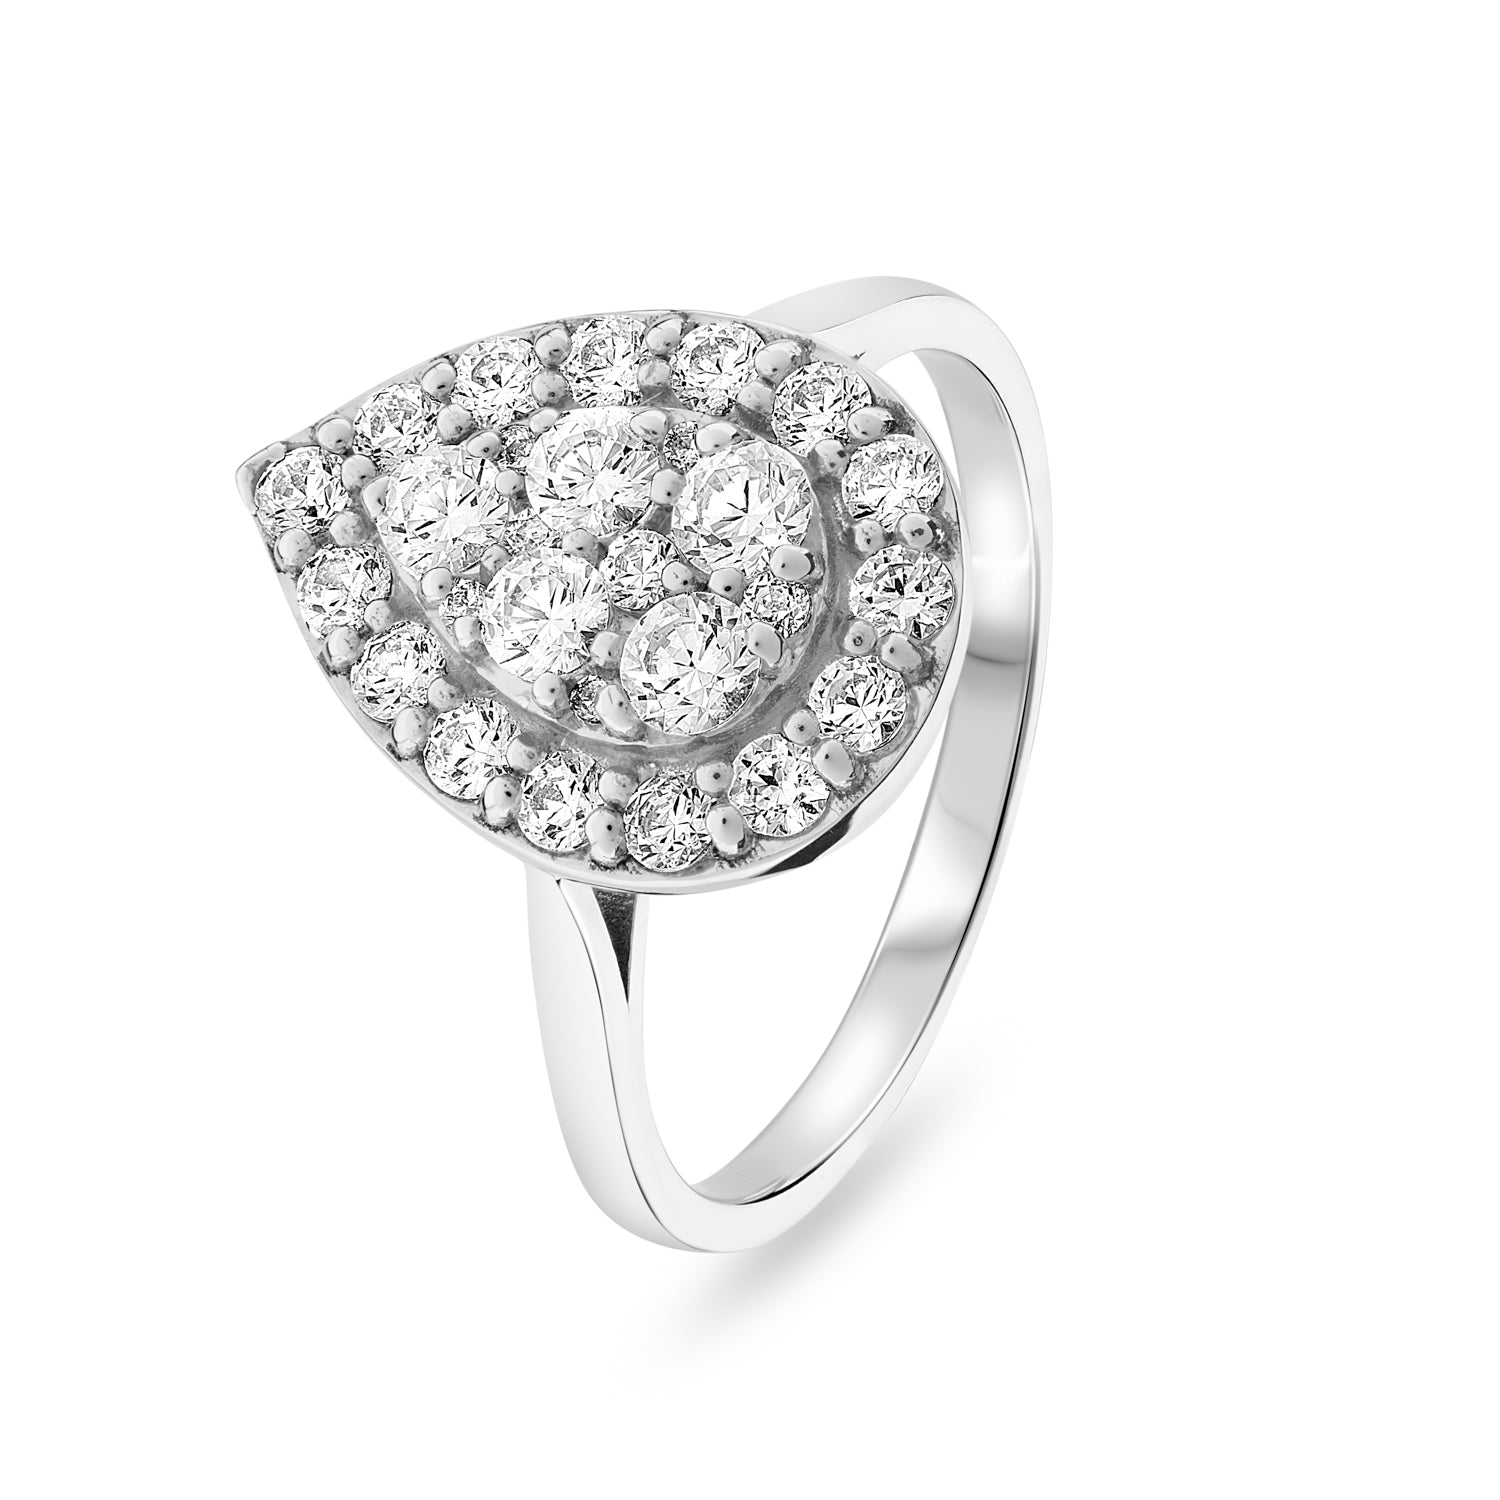 Diamond Pear Shaped Cluster Ring. 1.00ct